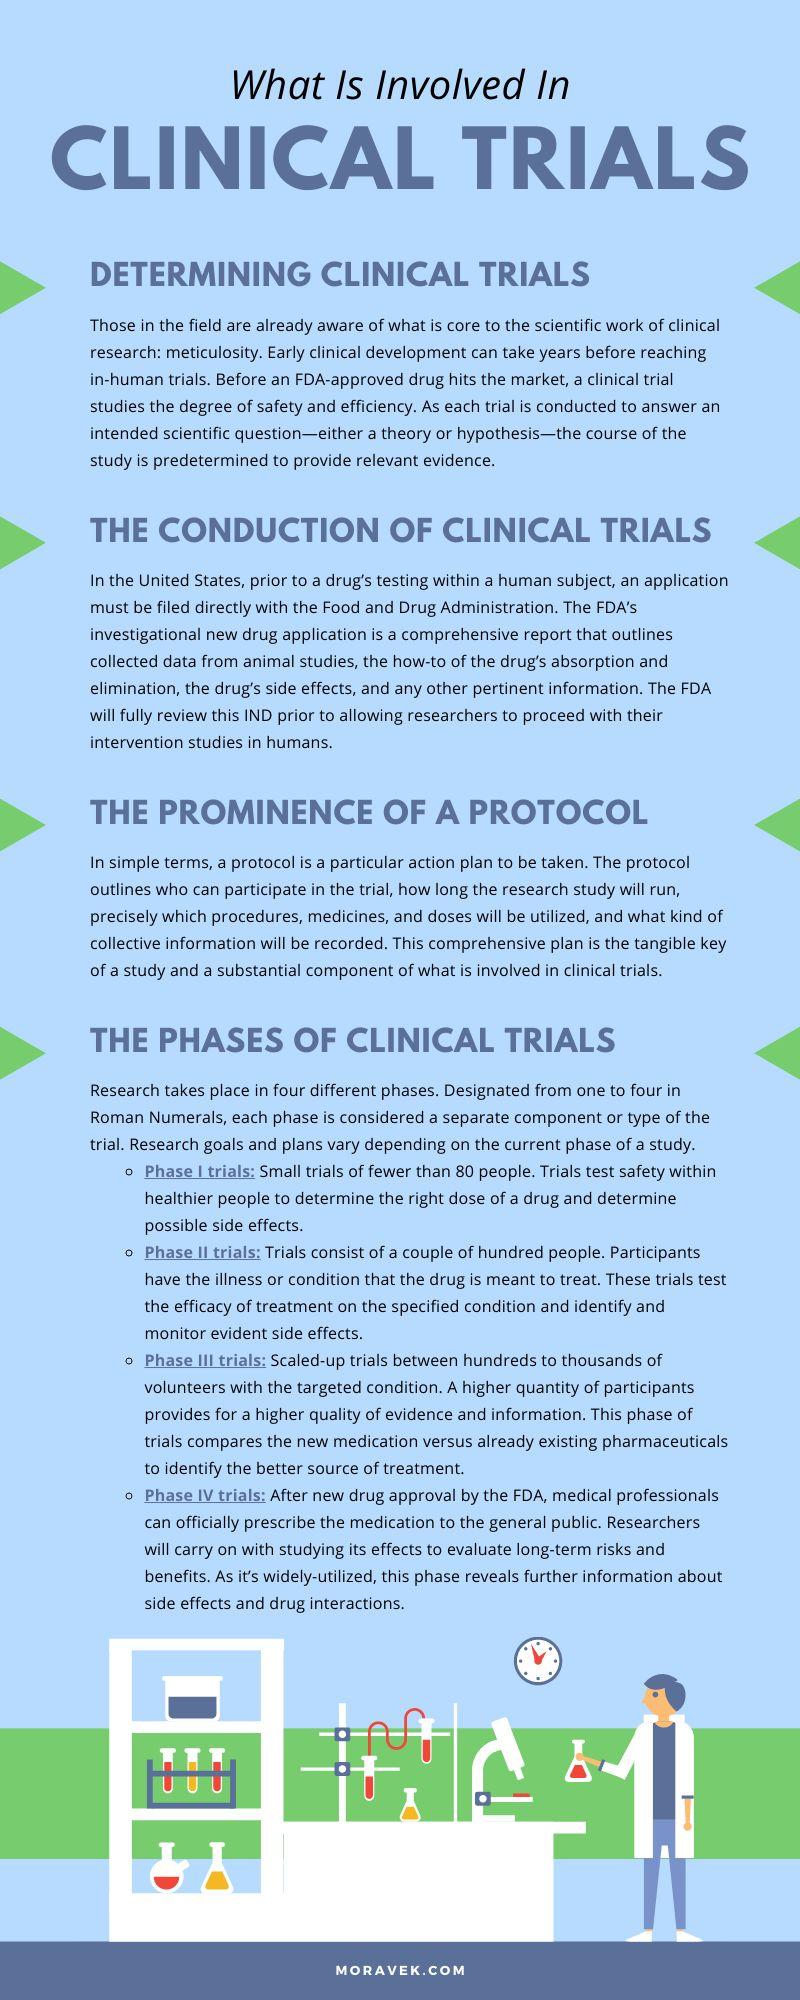 What Is Involved In Clinical Trials